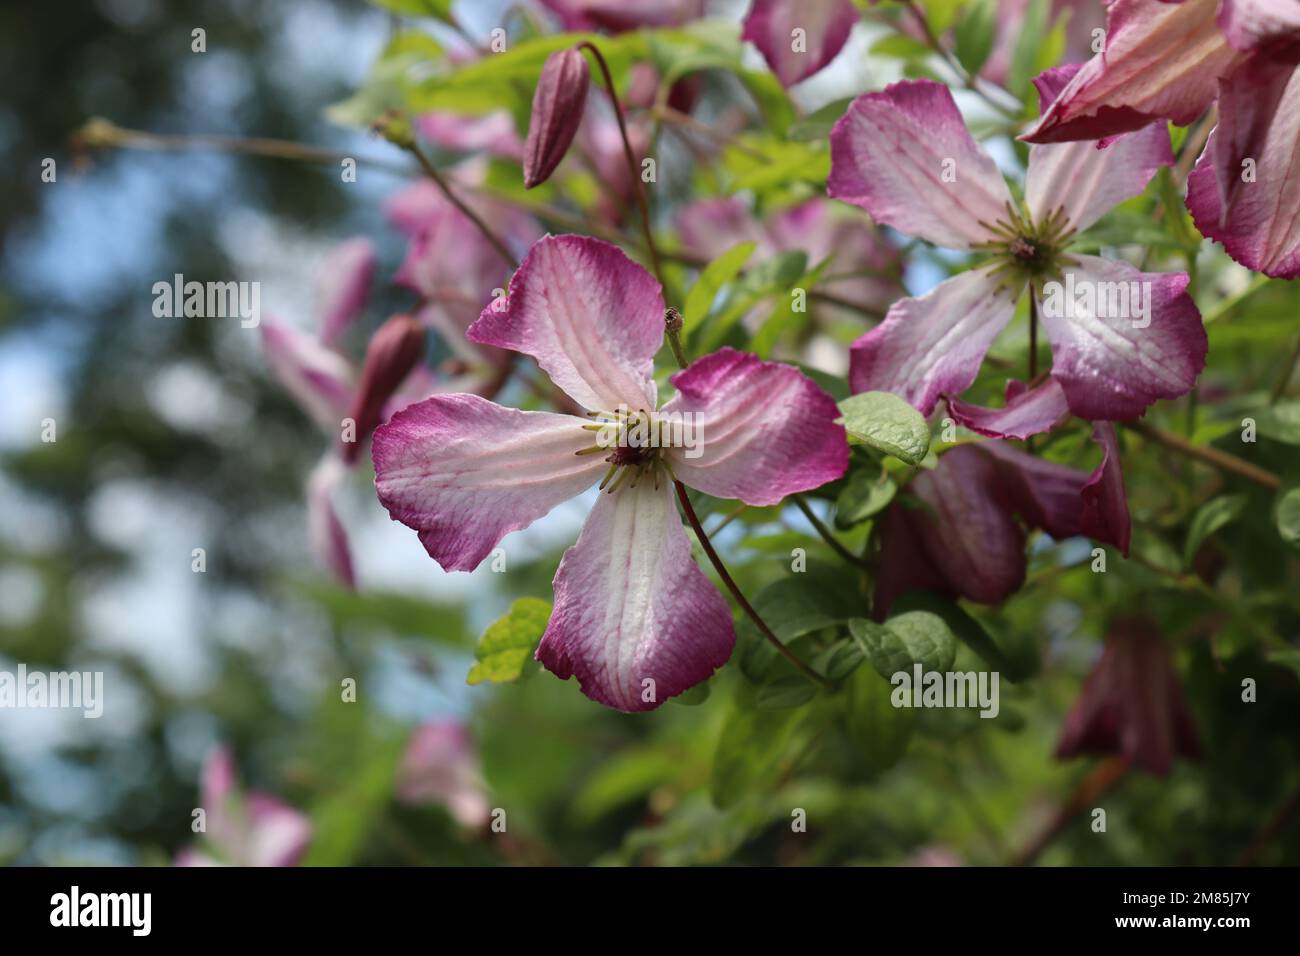 The beautiful summer flowers of the climbing plant Clematis viticella 'Minuet'. A cluster of white and pink blooms with copy space to the left. Stock Photo